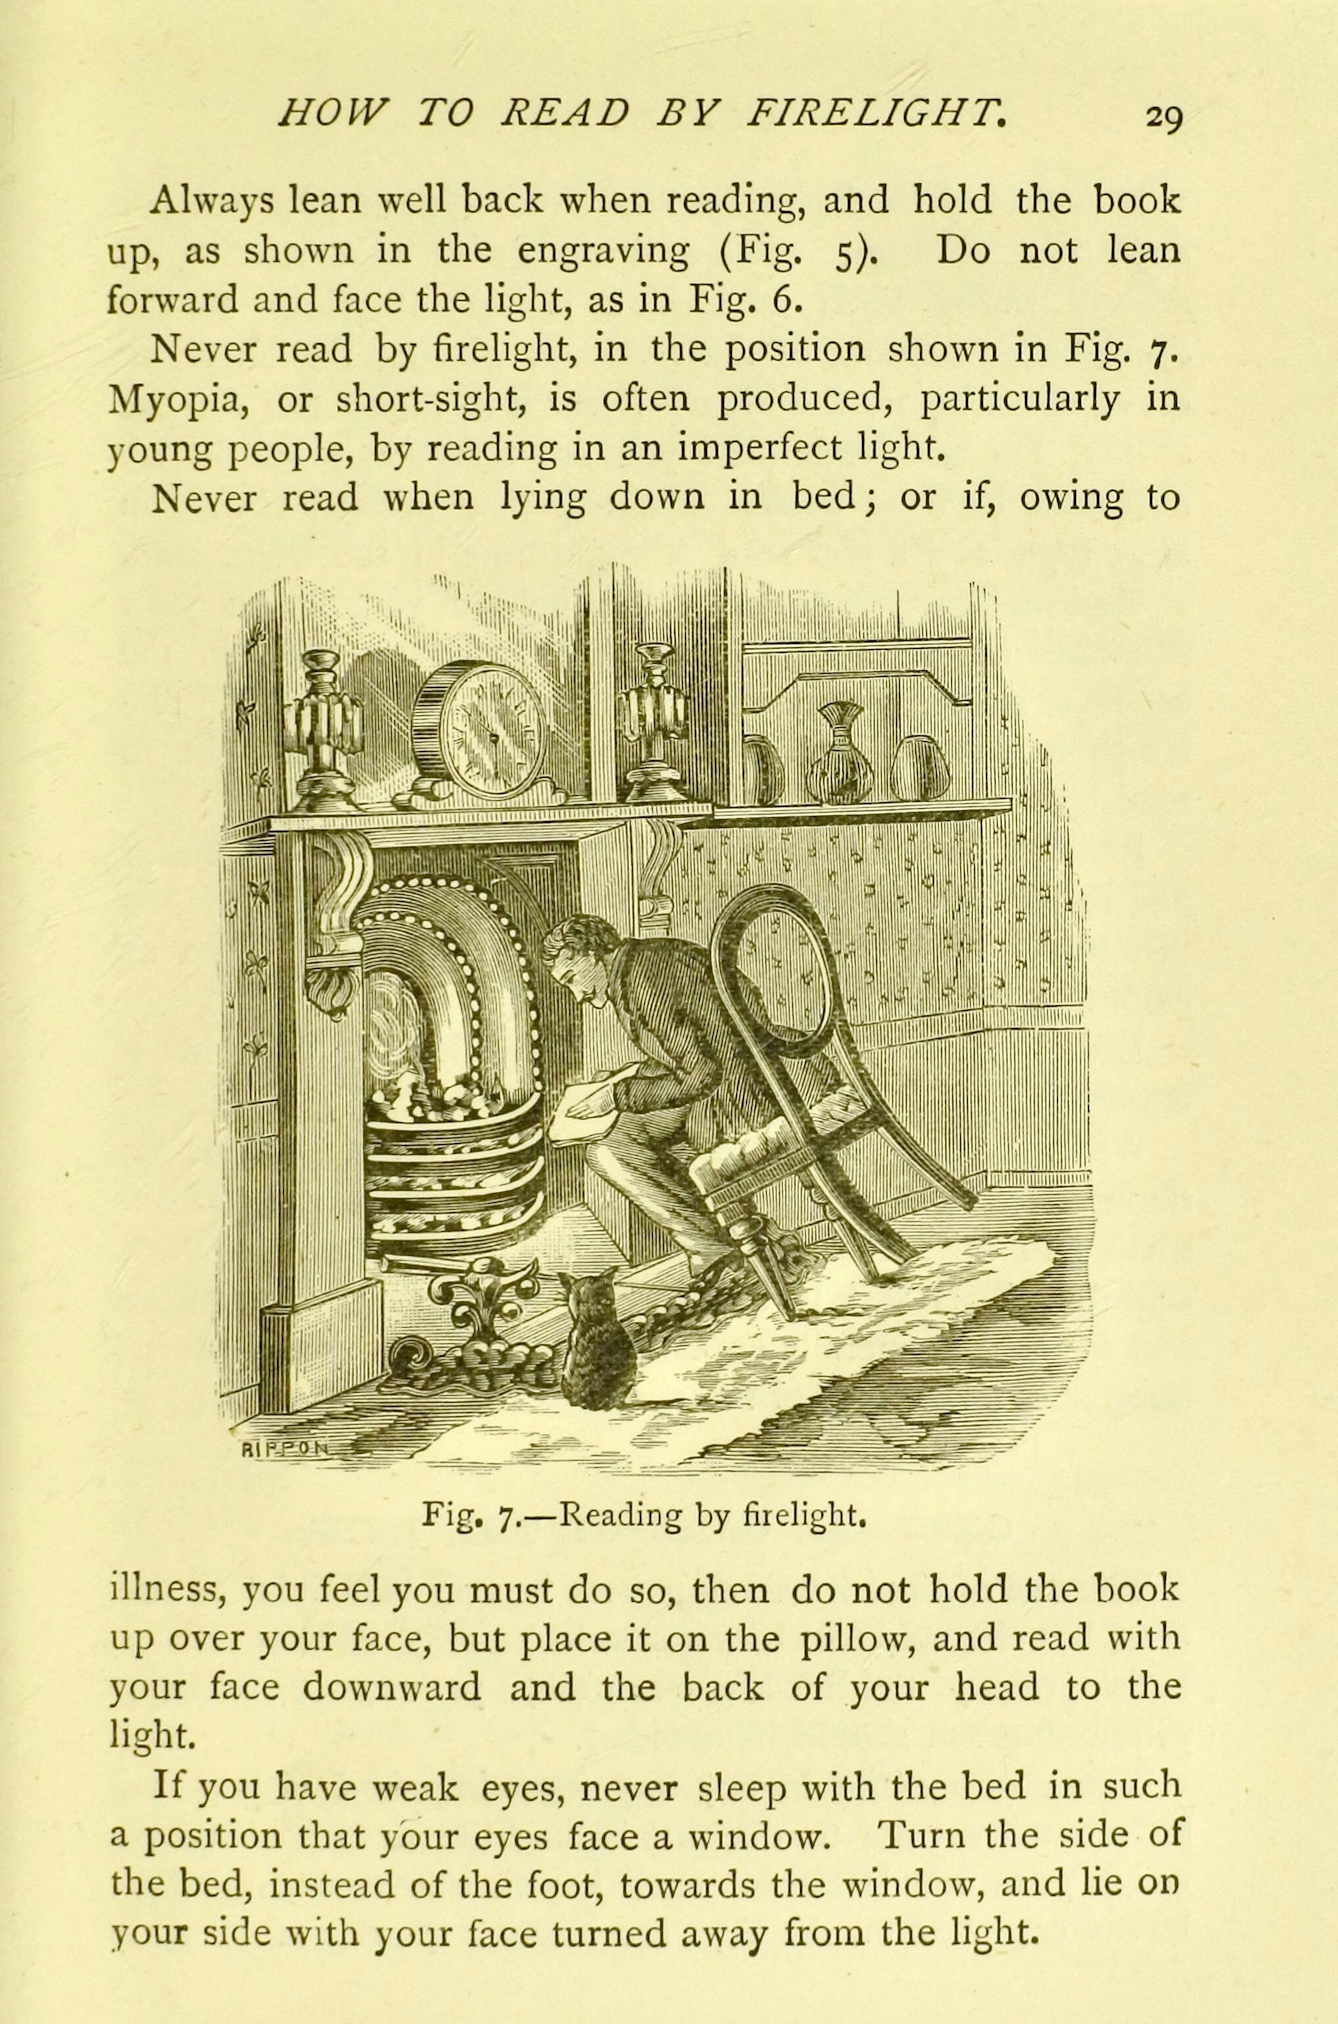 A page from a book titled 'How to Read by Firelight' . In the middle of the page is a line engraving of a smartly-dressed Victorian man with a moustache in a wealthy parlour. He is sittling on a dining chair that is tipued up onto its front two legs as he leans into a fireplace with an open book on his lap. A cat sits beside im on the hearth rug. Above and below the image is text giving advice on the best conditions for reading.